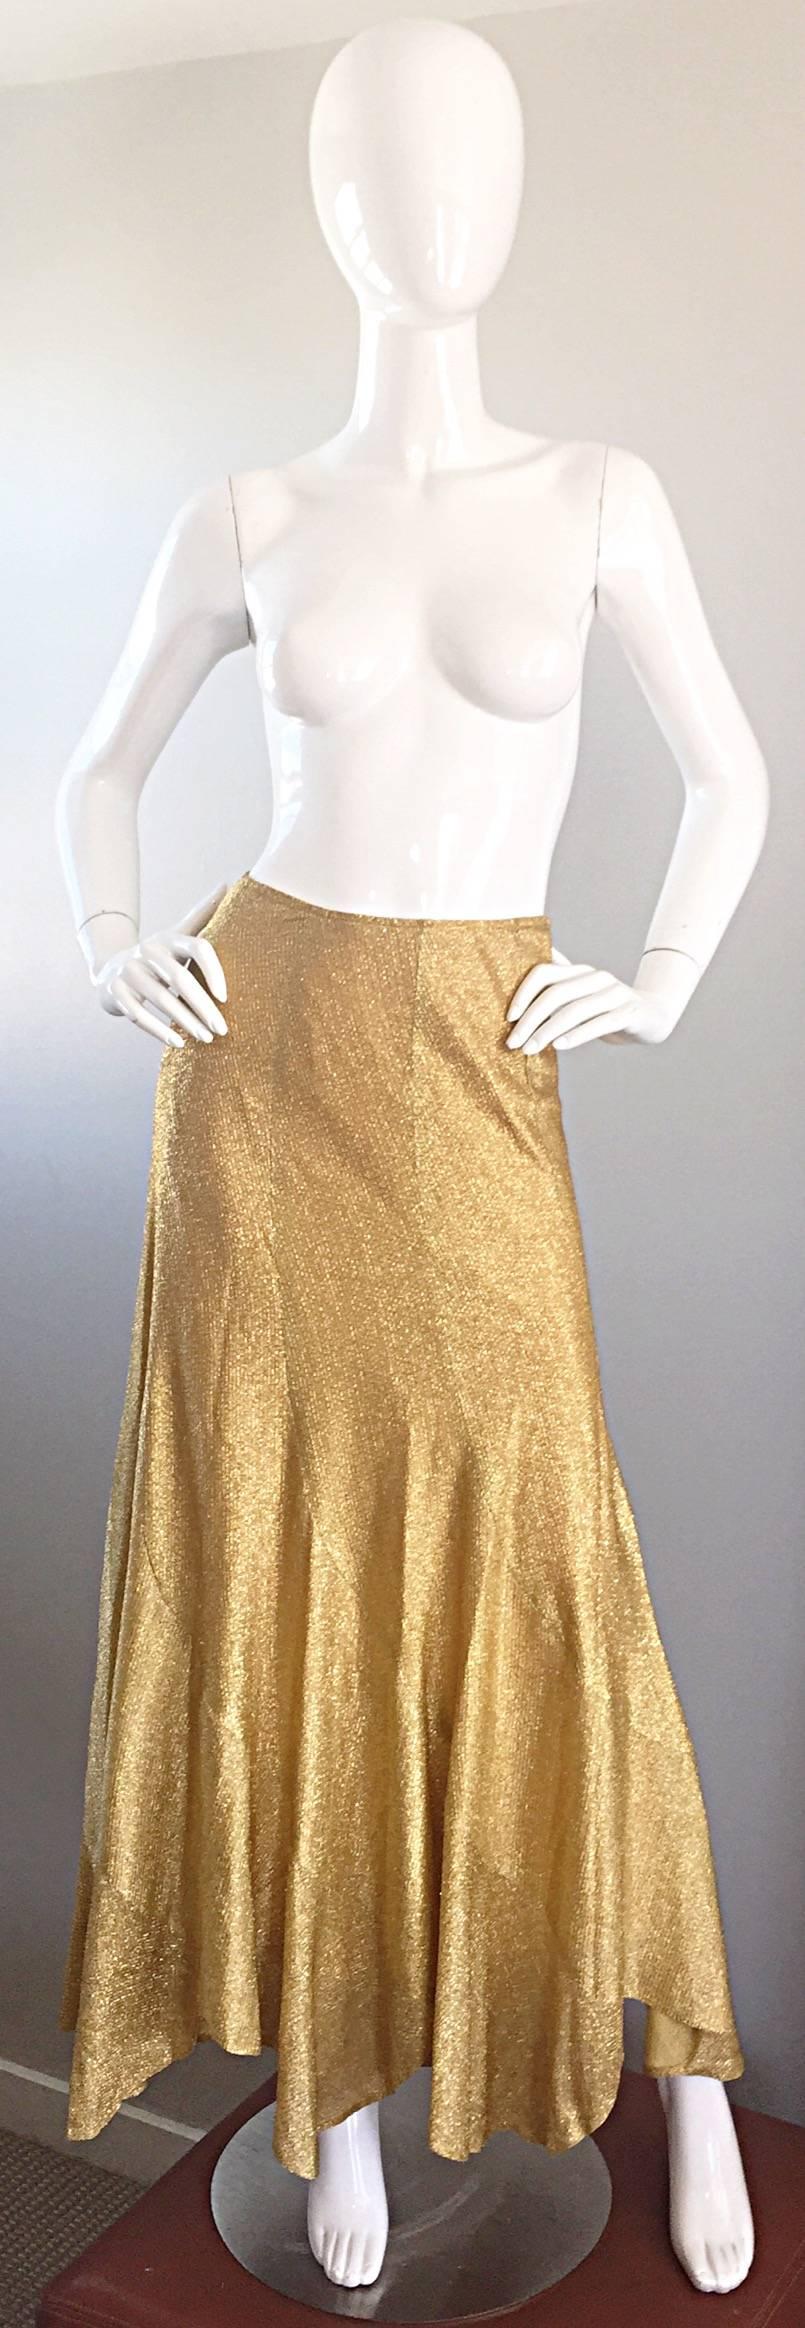 Incredible vintage 70s BEVERLY PAIGE gold metallic handkerchief skirt! Wonderful movement, with a handkerchief hem (asymmetrical lengths). Hidden zipper up the side with hook-and-eye closure. Fully lined. Perfect form day to night. Great with a tee,